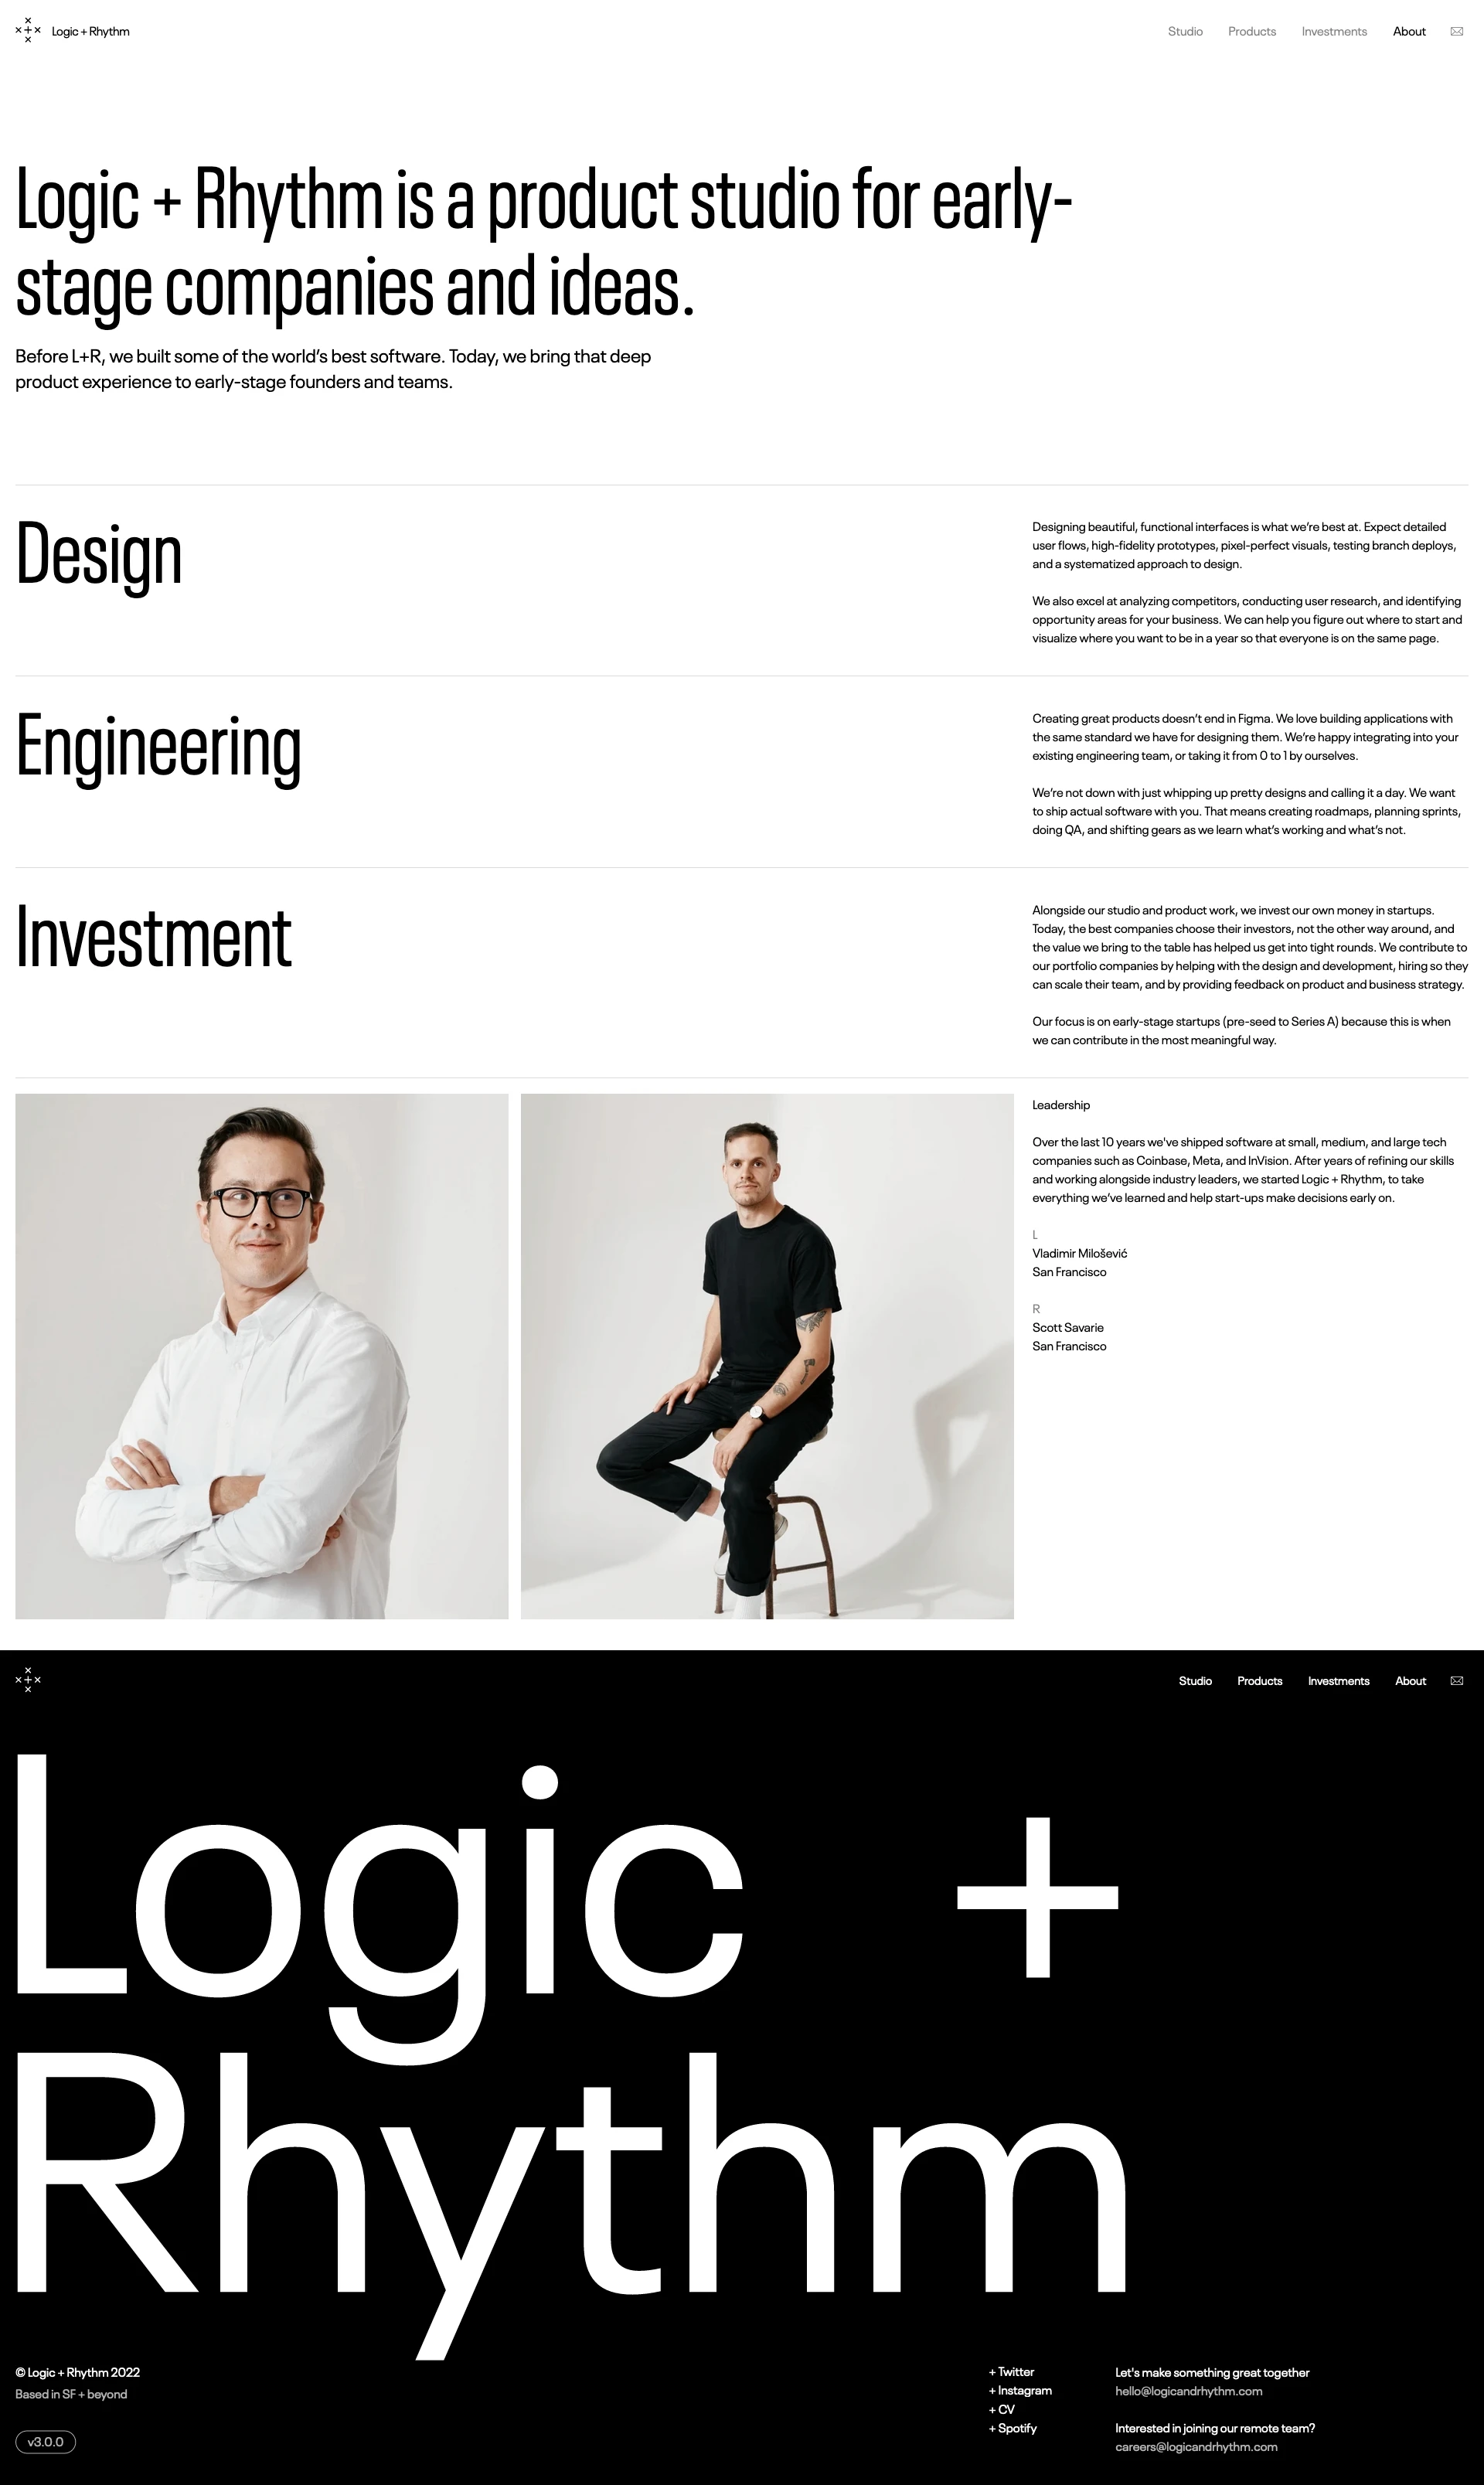 Logic + Rhythm Landing Page Example: We make early-stage products with exceptional companies through design, engineering, and investment.